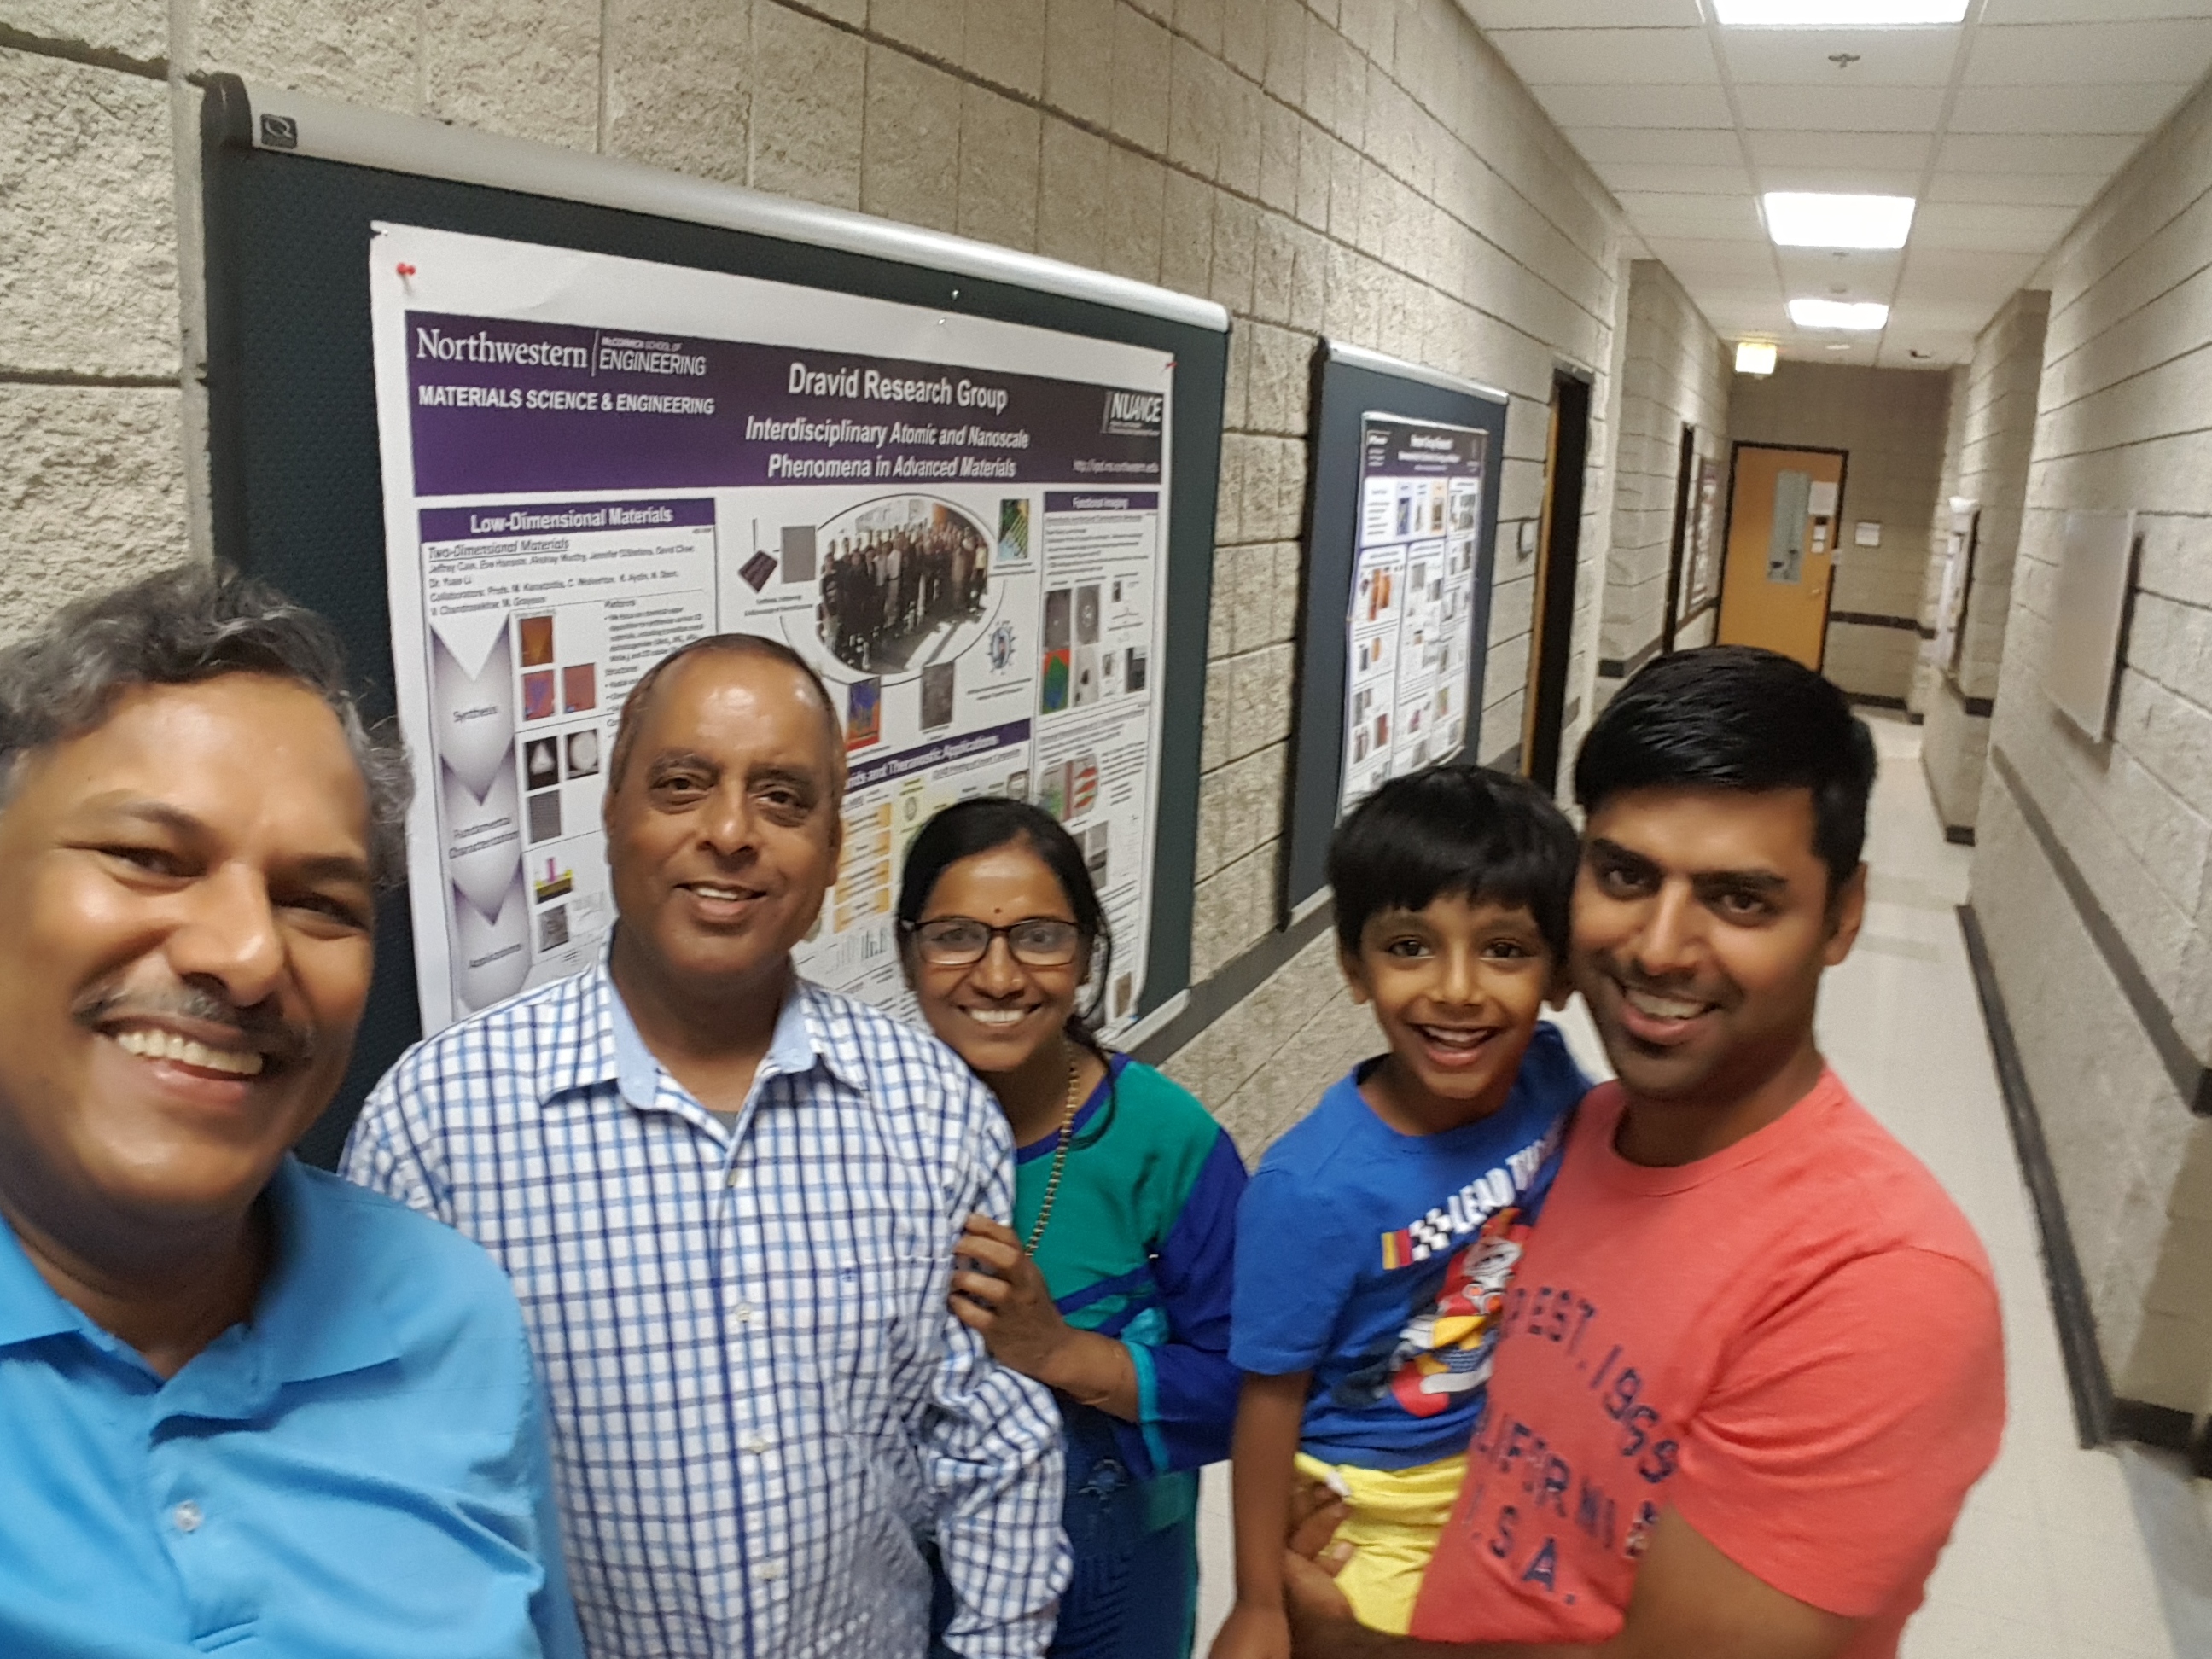 Professor Dravid snapped a selfie with Dr. Vikas Nandwana (far right), with his parents and son Shivam.